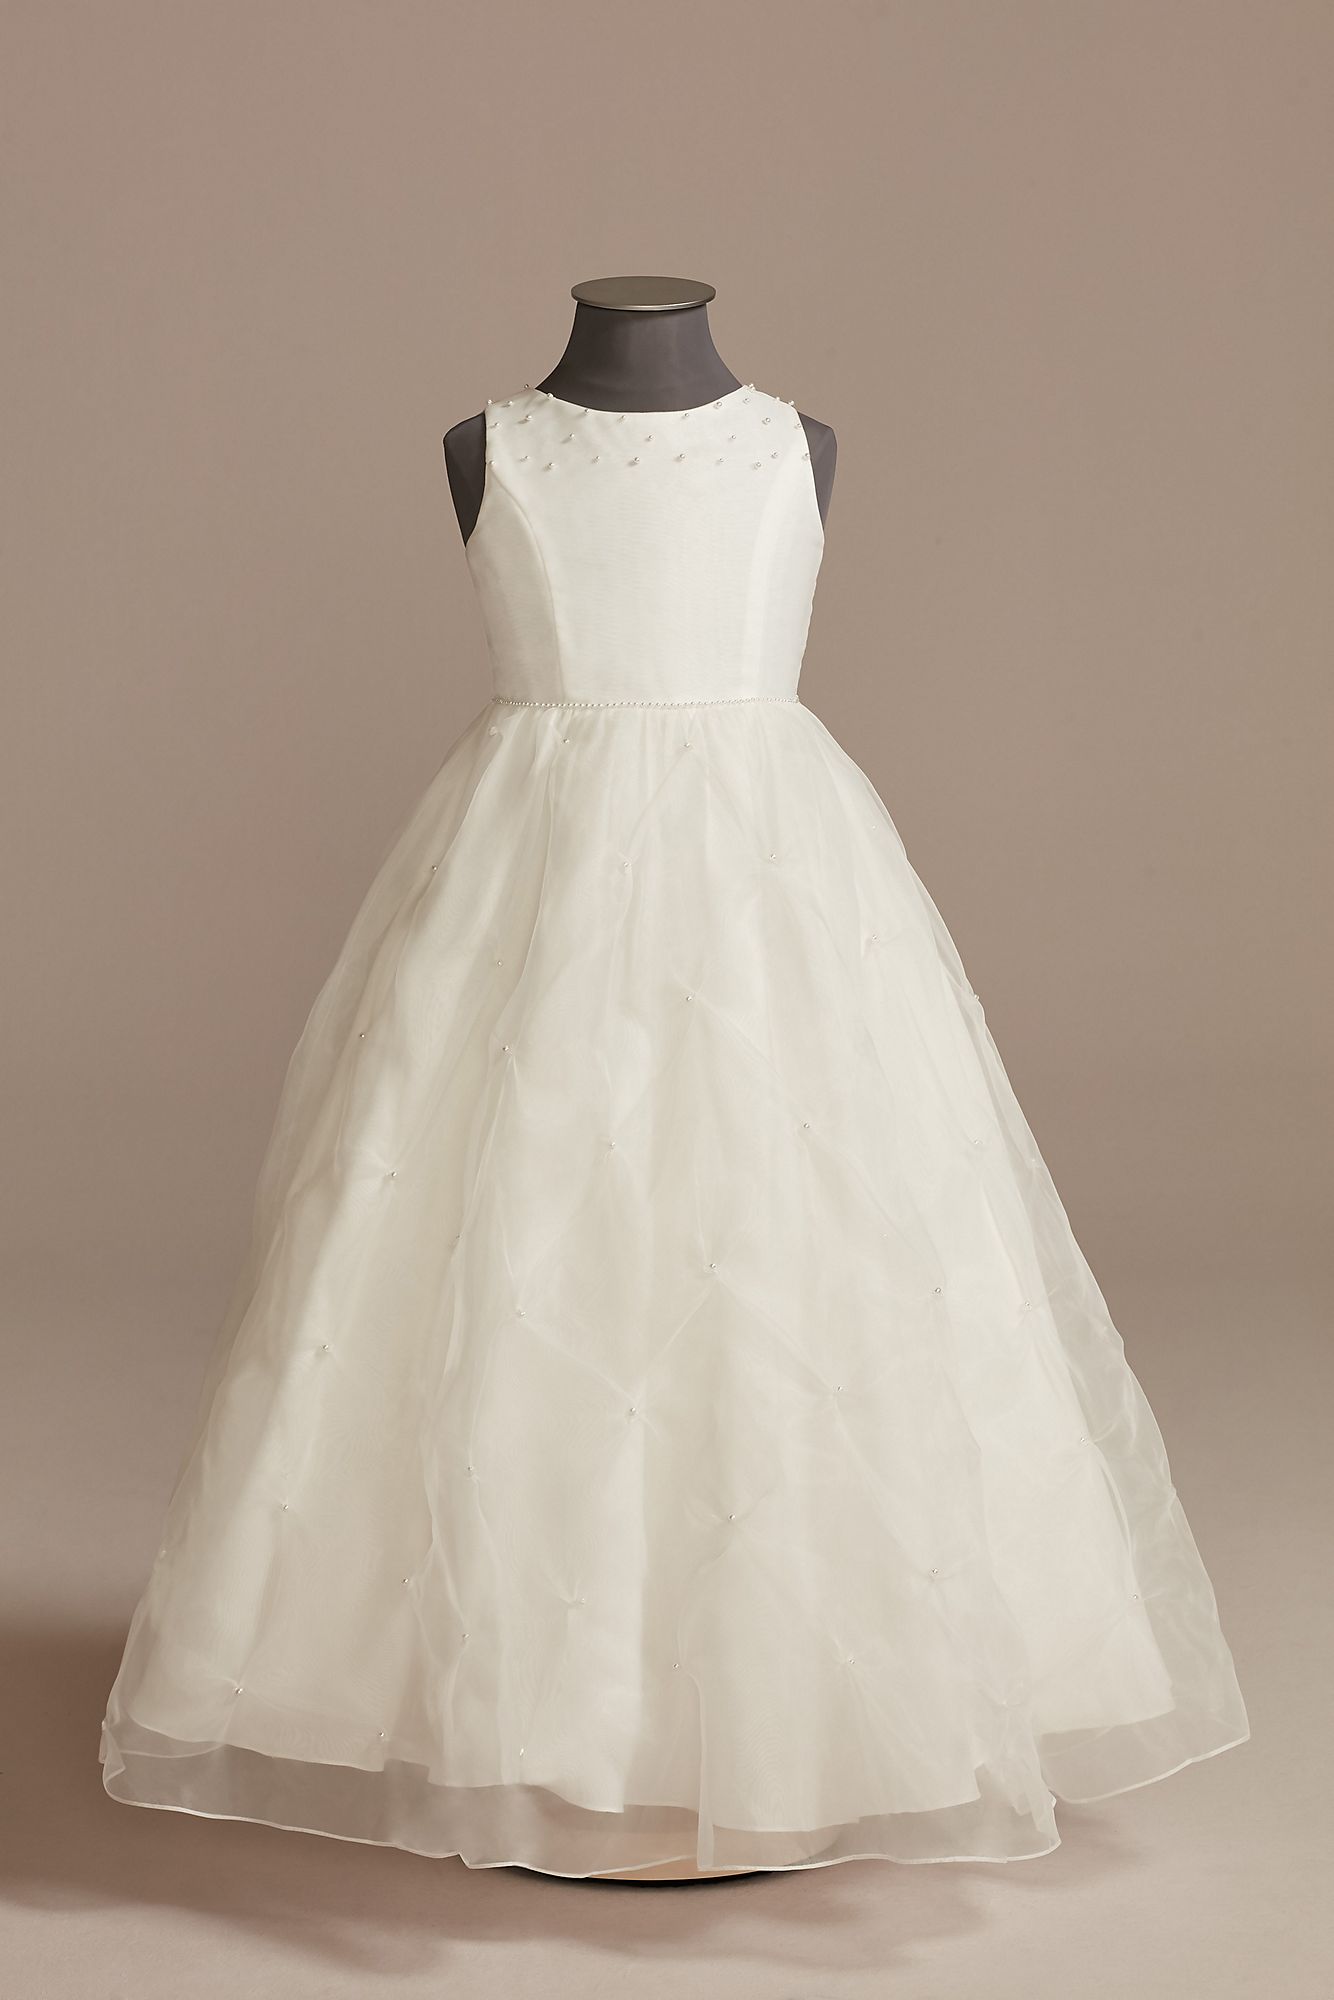 Puckered Flower Girl Dress with Hand-Placed Pearls DB Studio WG1426